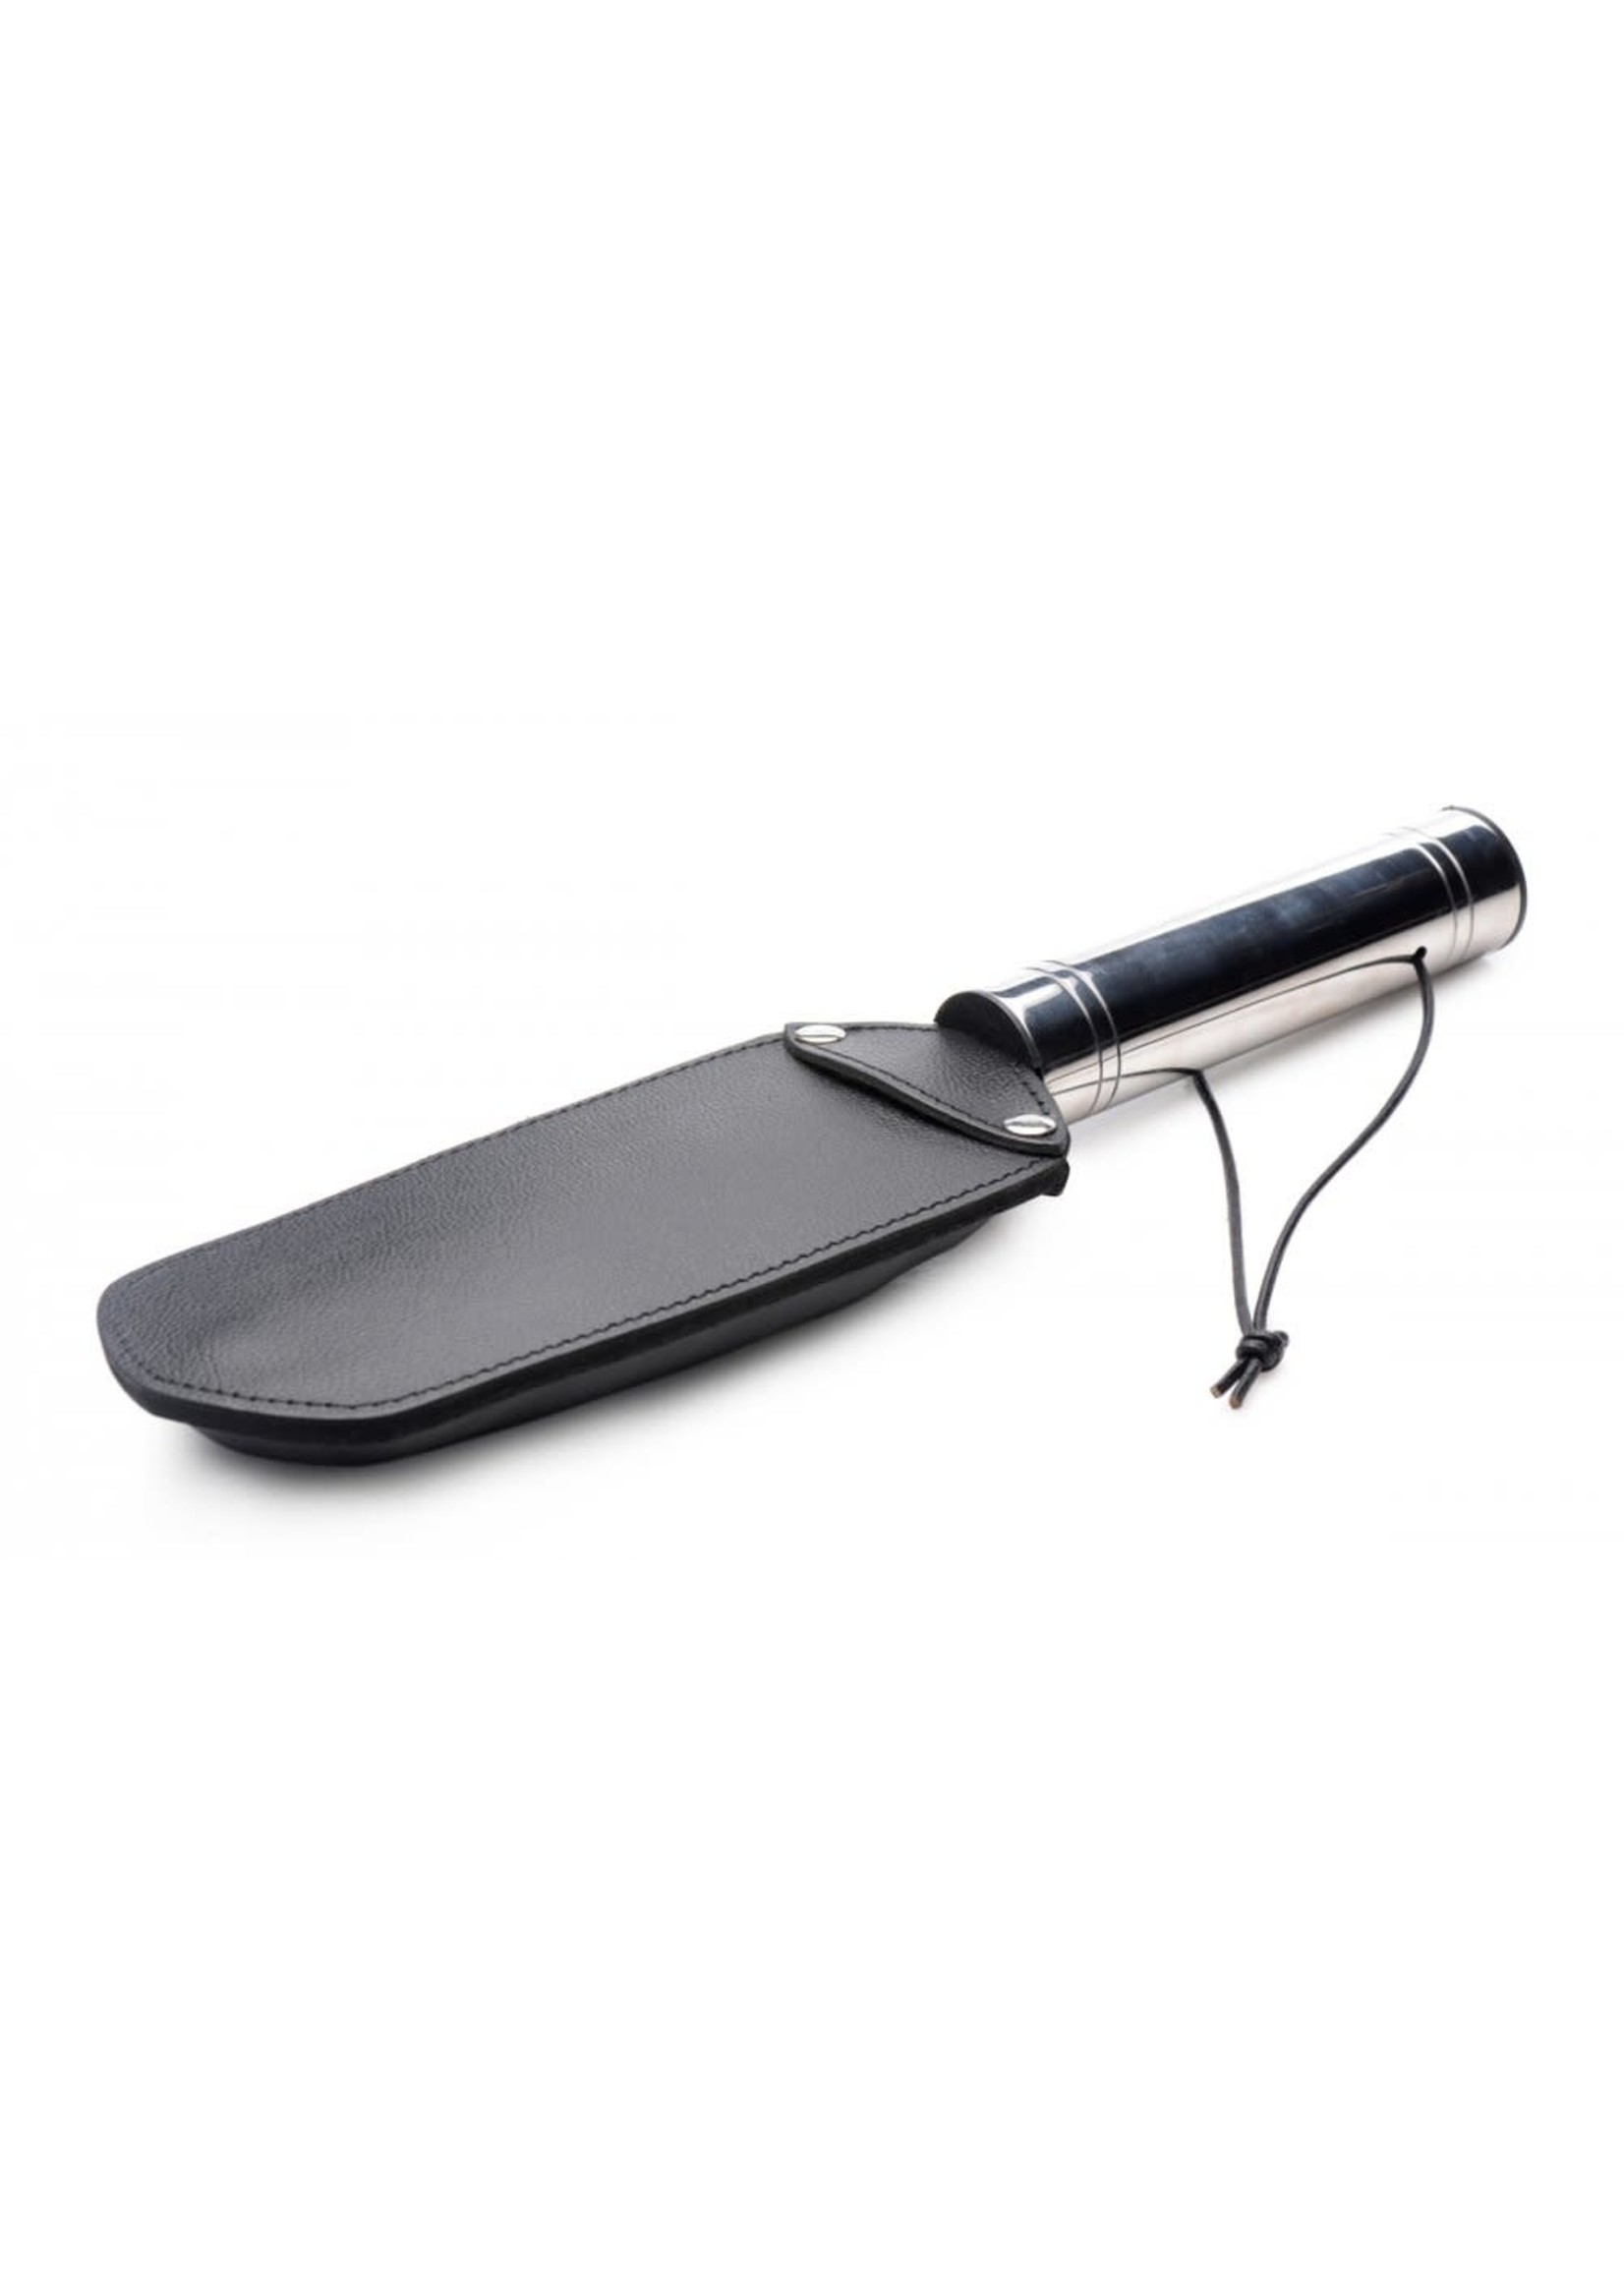 Strict Leather Leather Padded Paddle Strict Leather